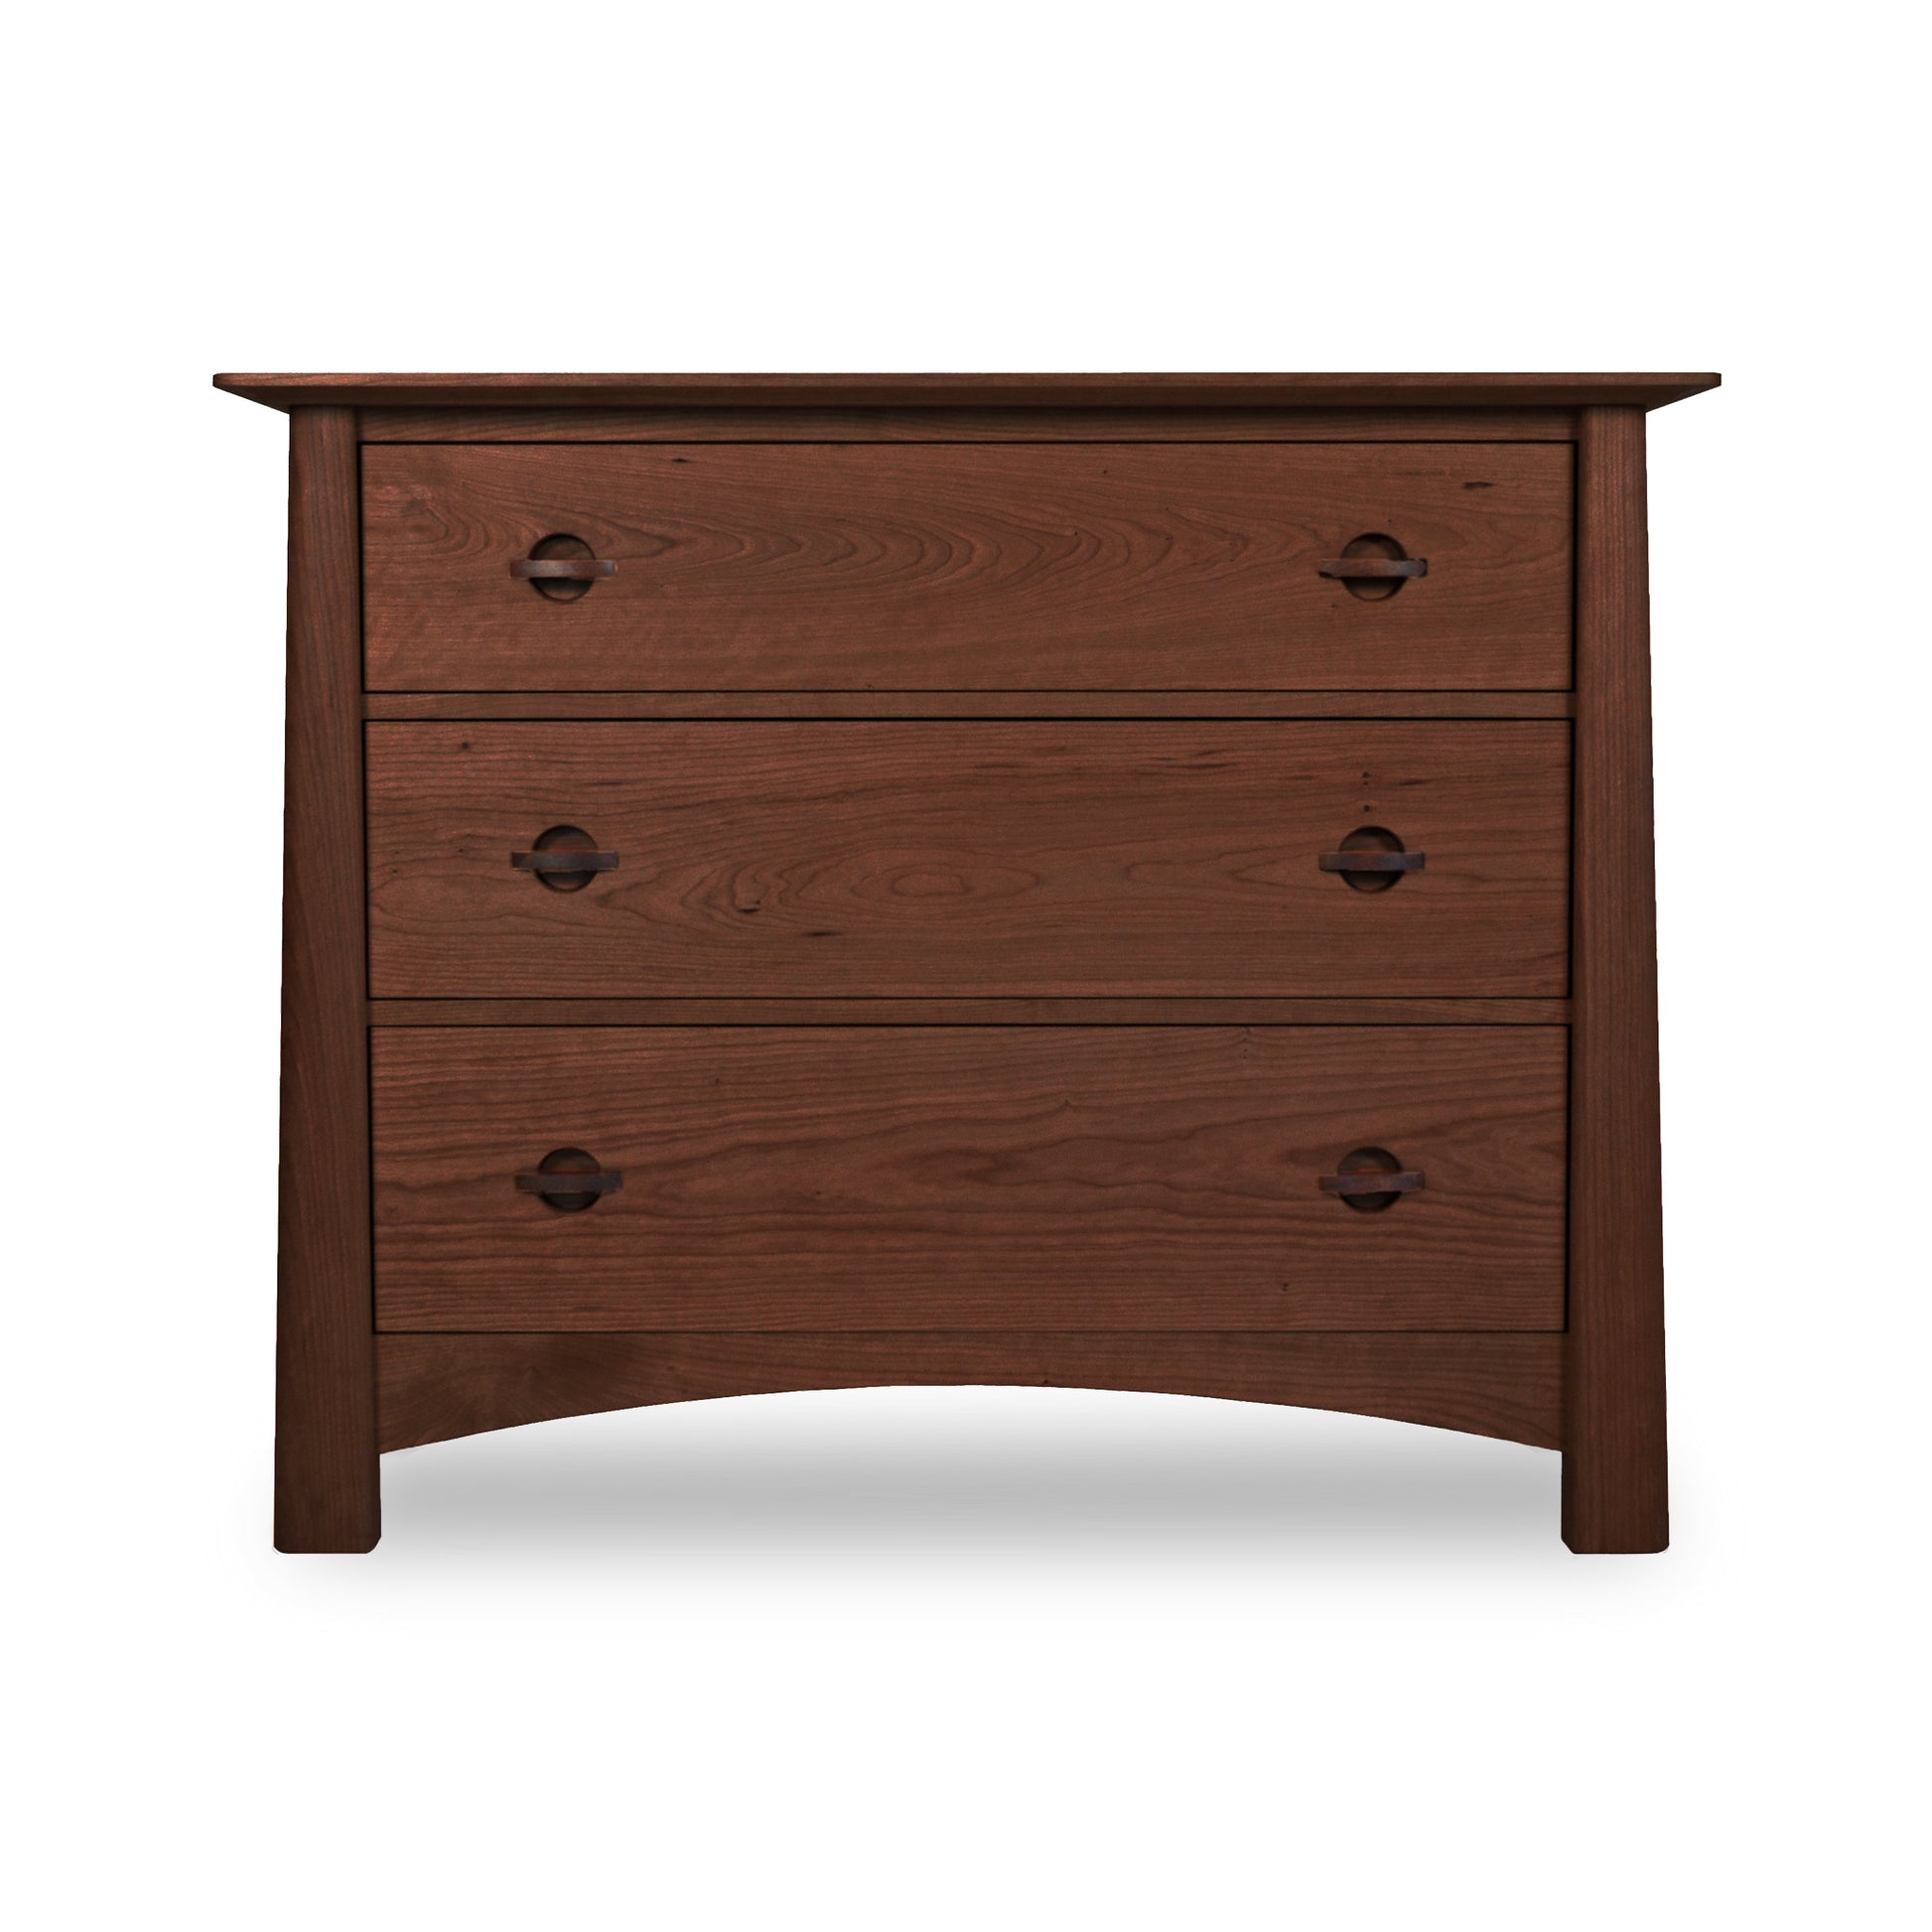 A Maple Corner Woodworks Cherry Moon 3-Drawer Chest with a rich, dark stain stands against a neutral background. It features three drawers, each with a round, centered knob, and an elegantly curved bottom edge.